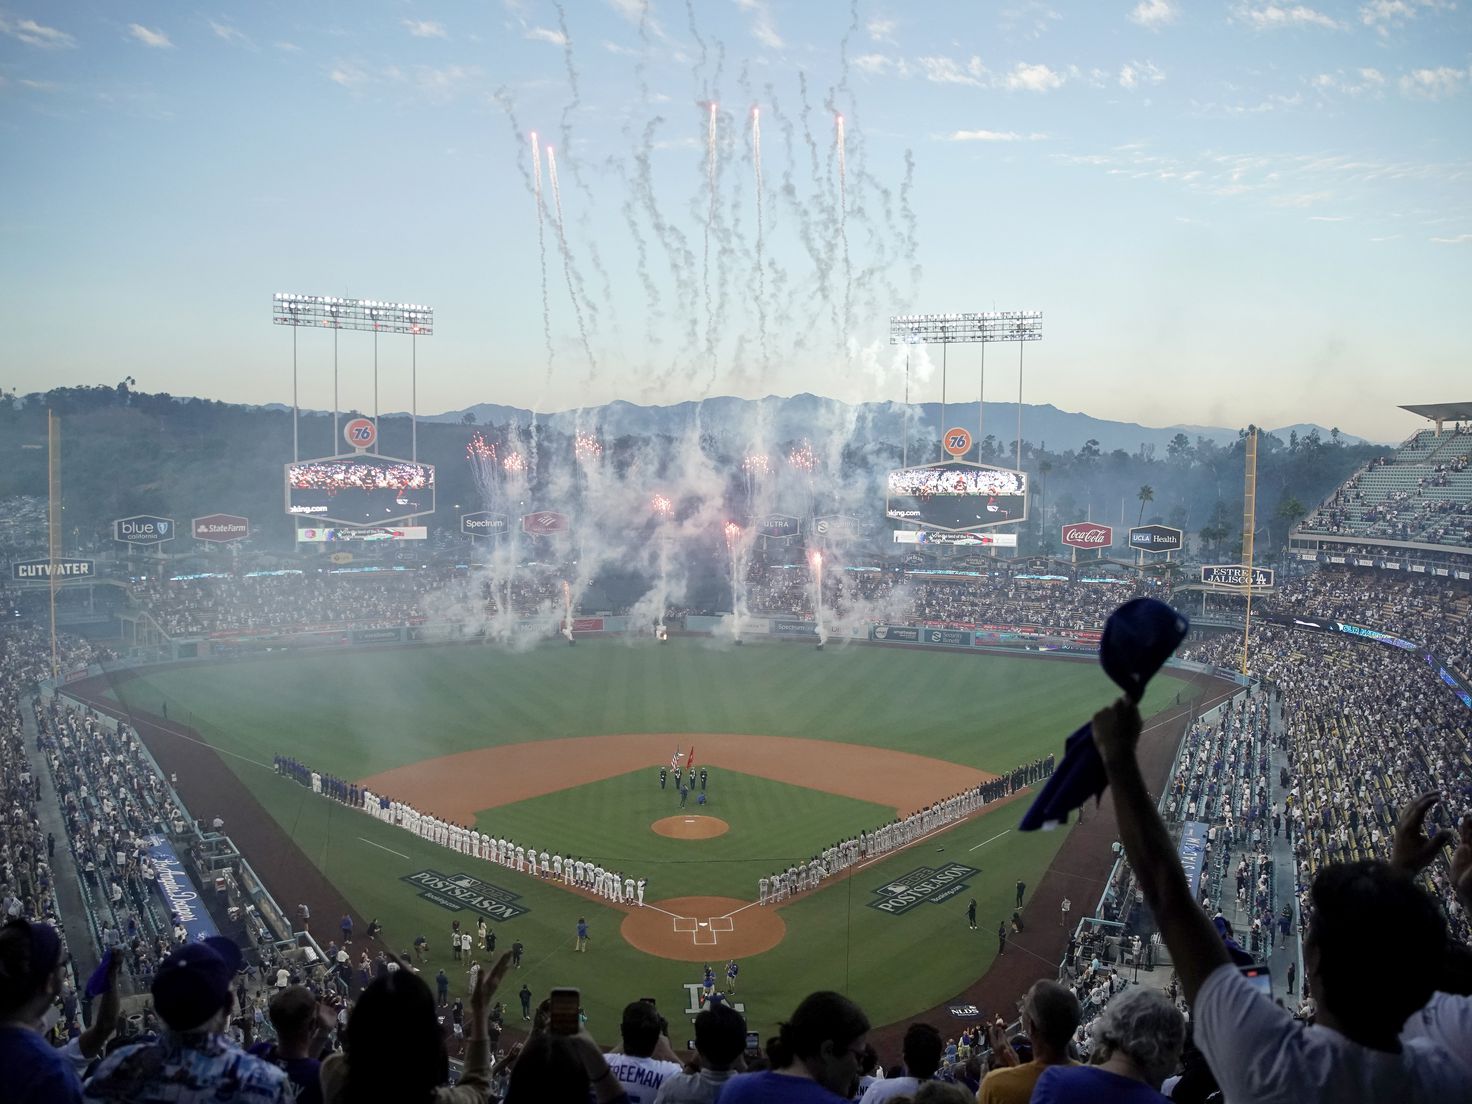 Los Angeles Dodgers Playoffs Schedule, Tickets Prices for MLB